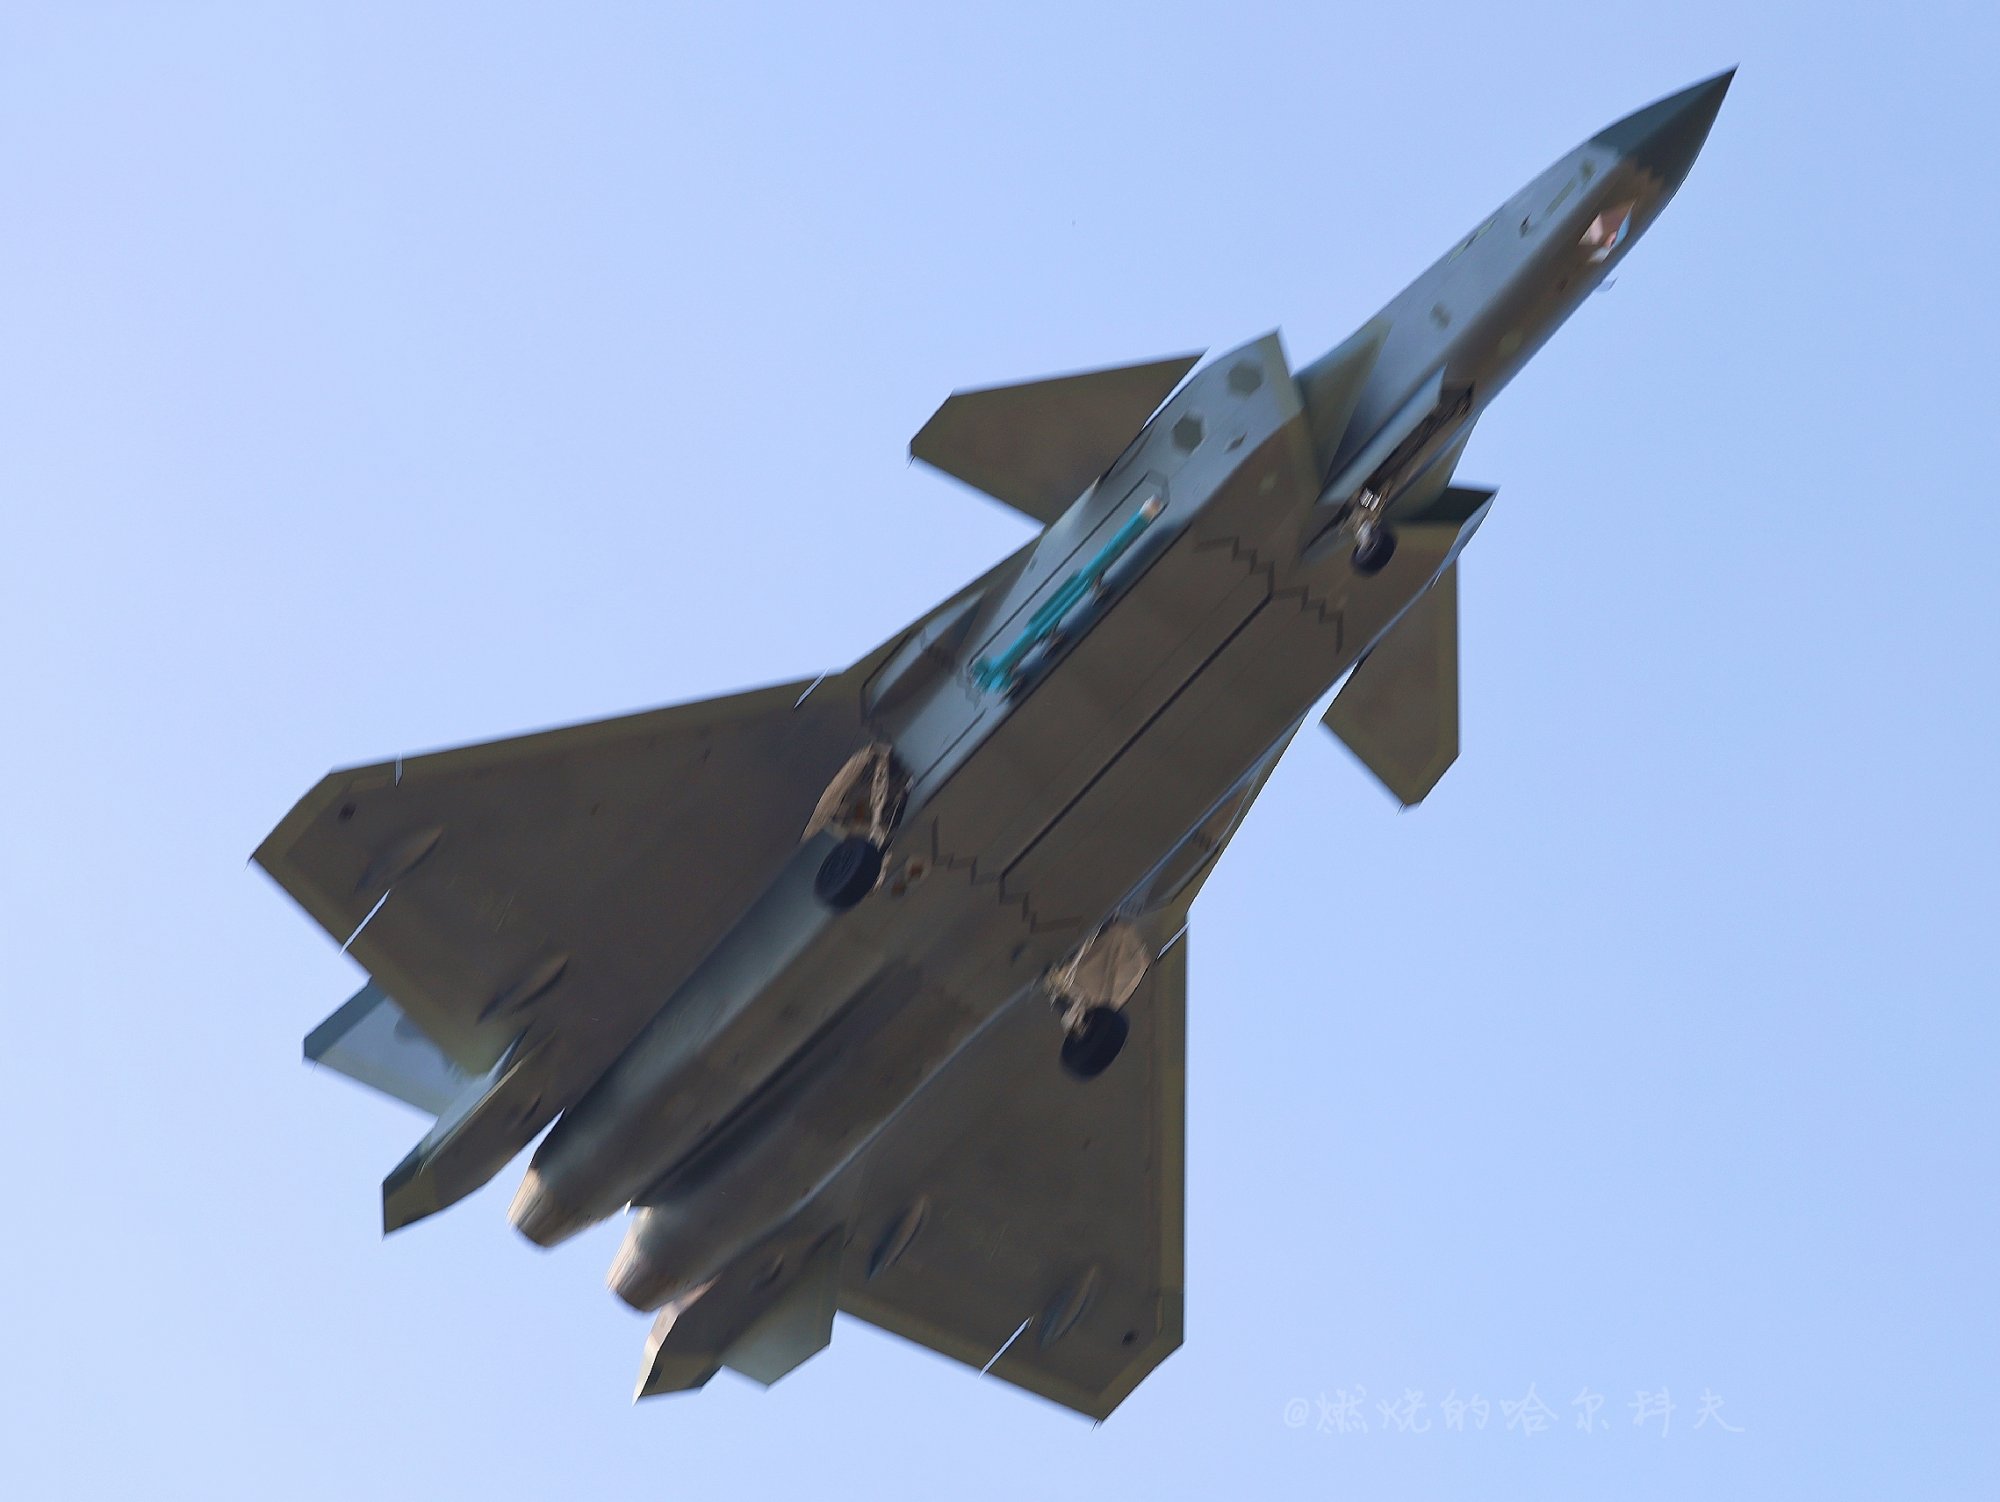 J-20 with a lateral missile side extended 2020-11.jpg